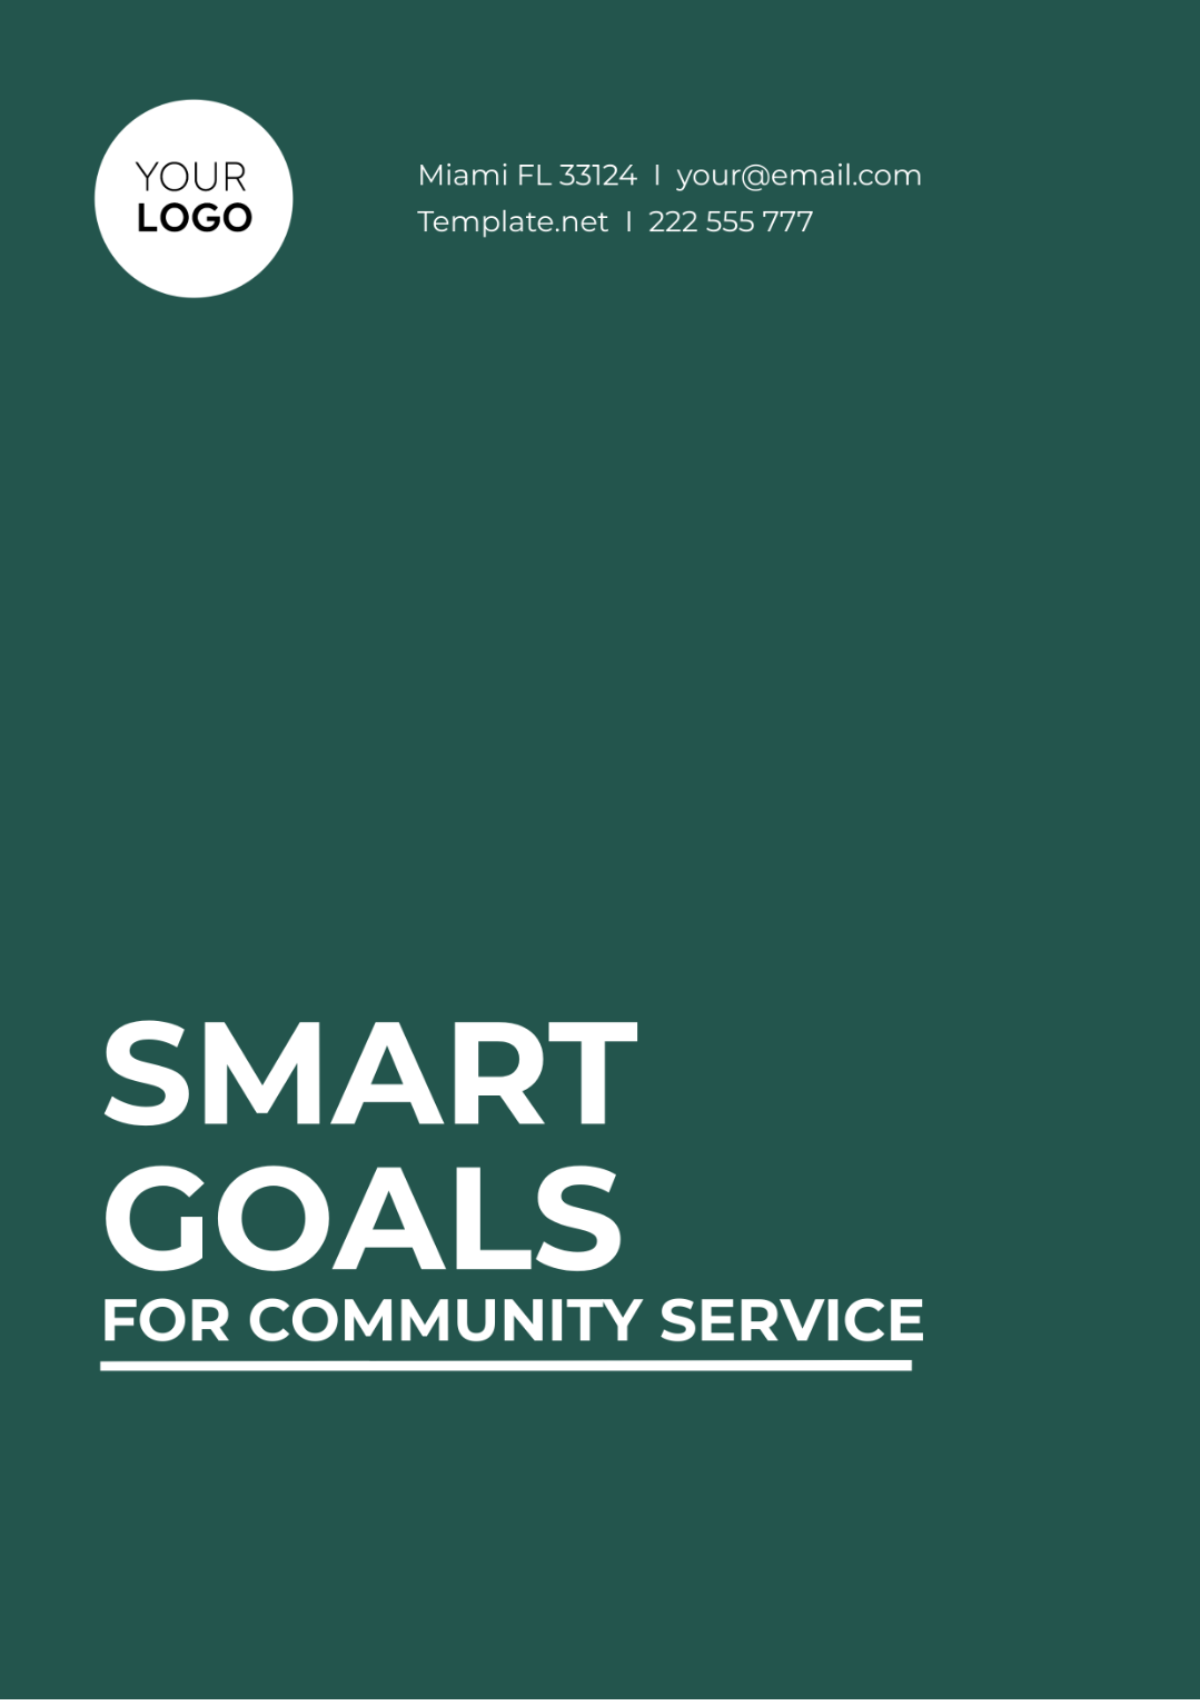 Free SMART Goals Template for Community Service